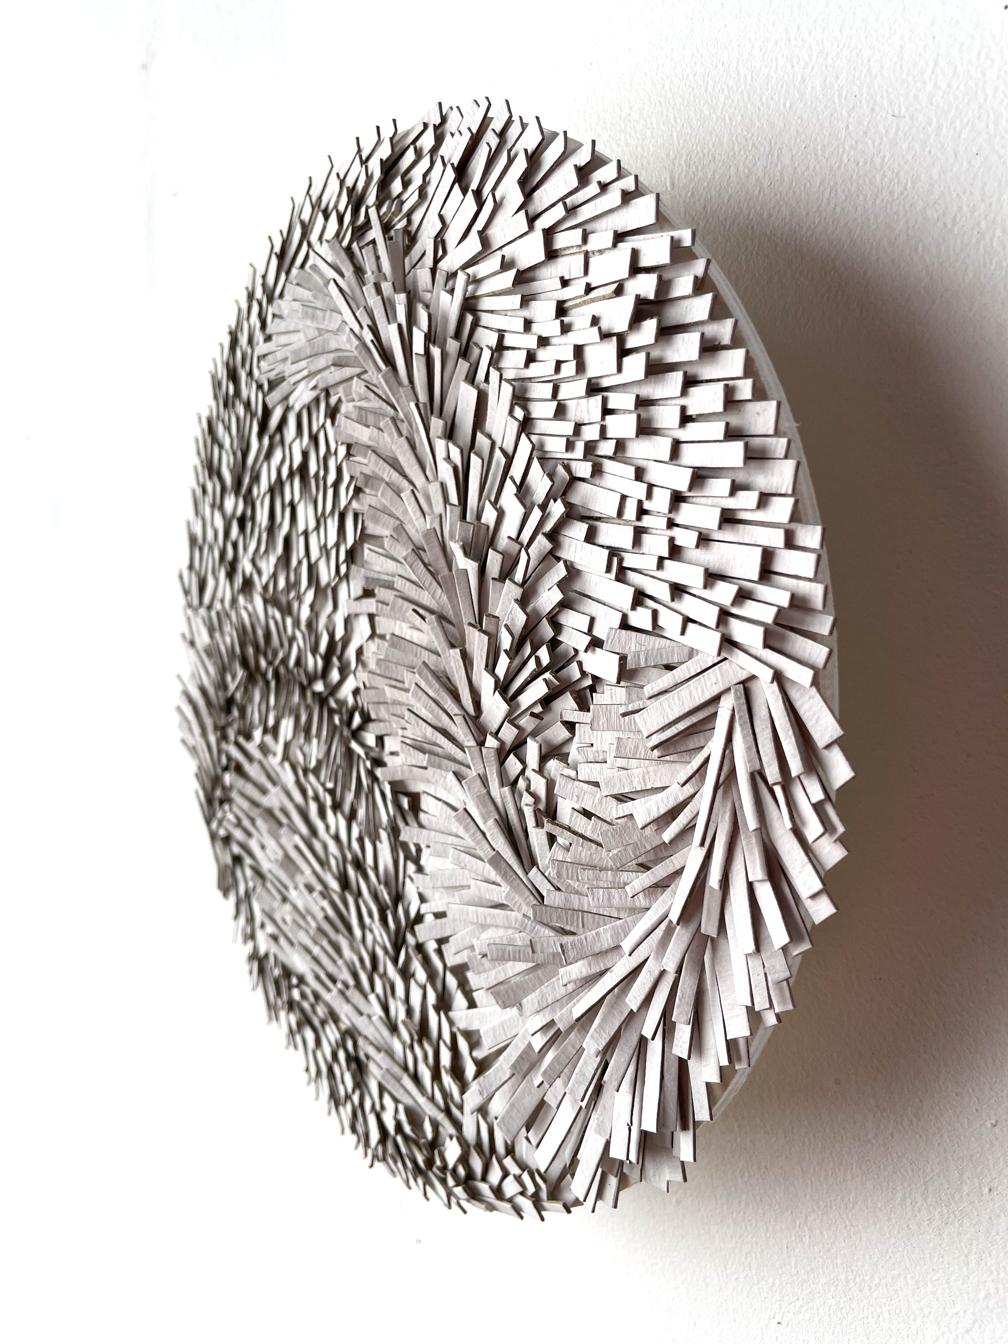 White Path - 3D small contemporary abstract round mural sculpture  - Abstract Geometric Mixed Media Art by Erin Vincent